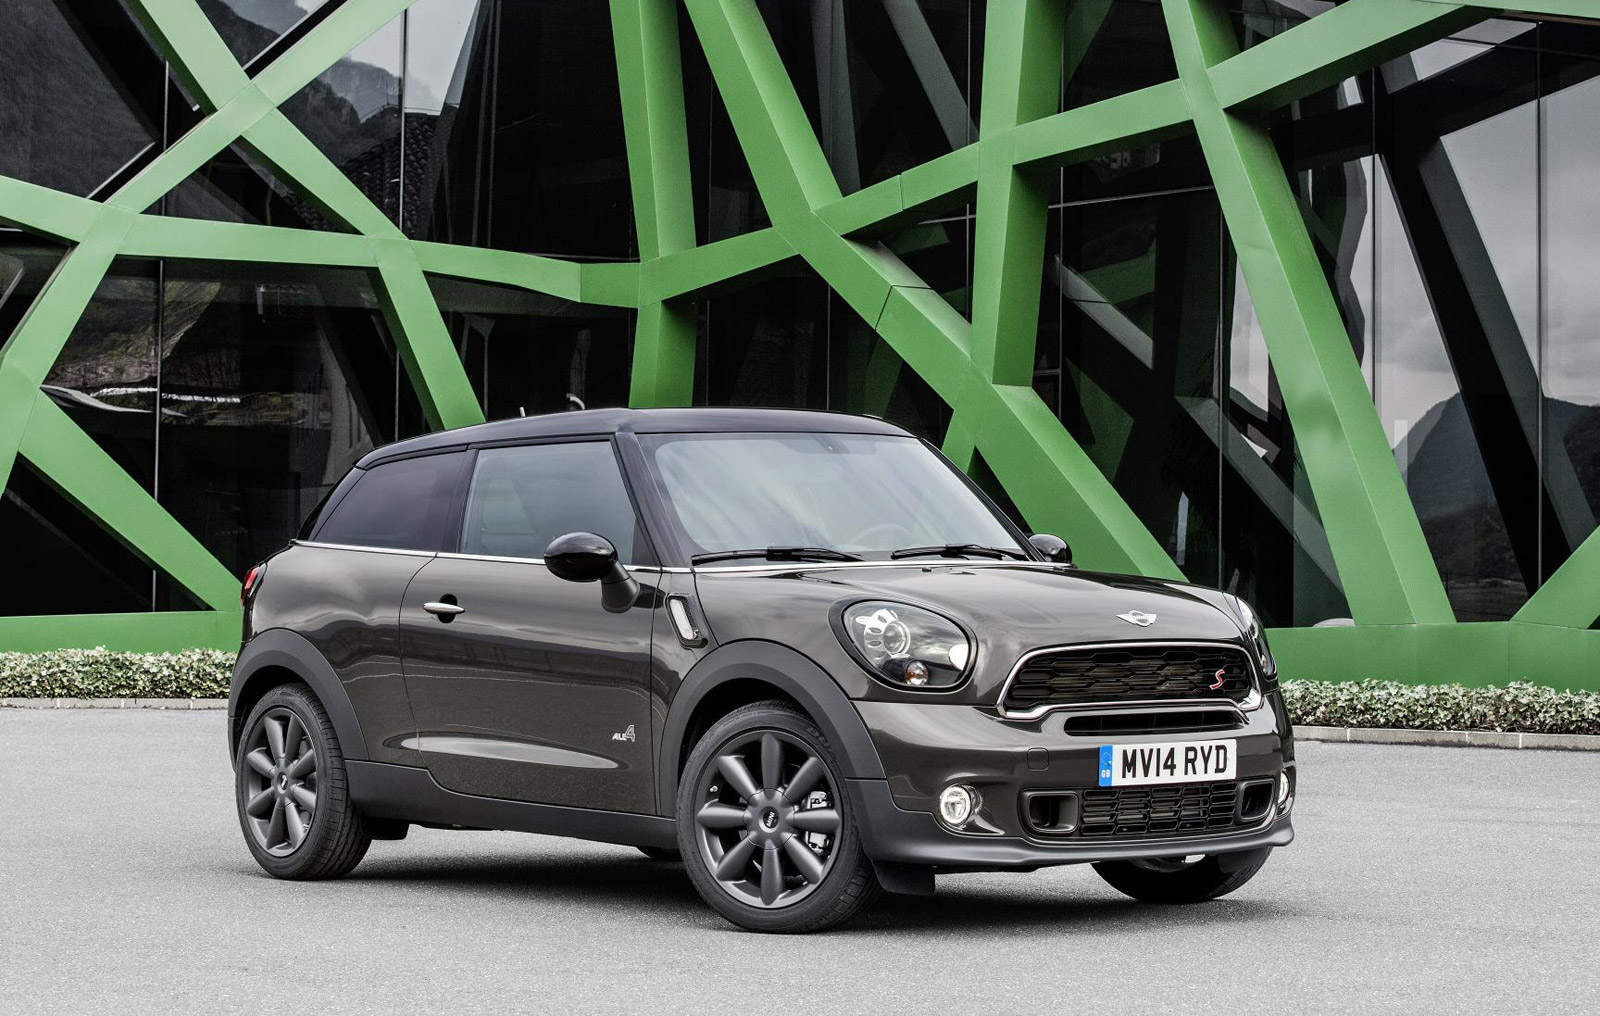 2015 MINI Paceman Rolled Out At 2014 Beijing Auto Show